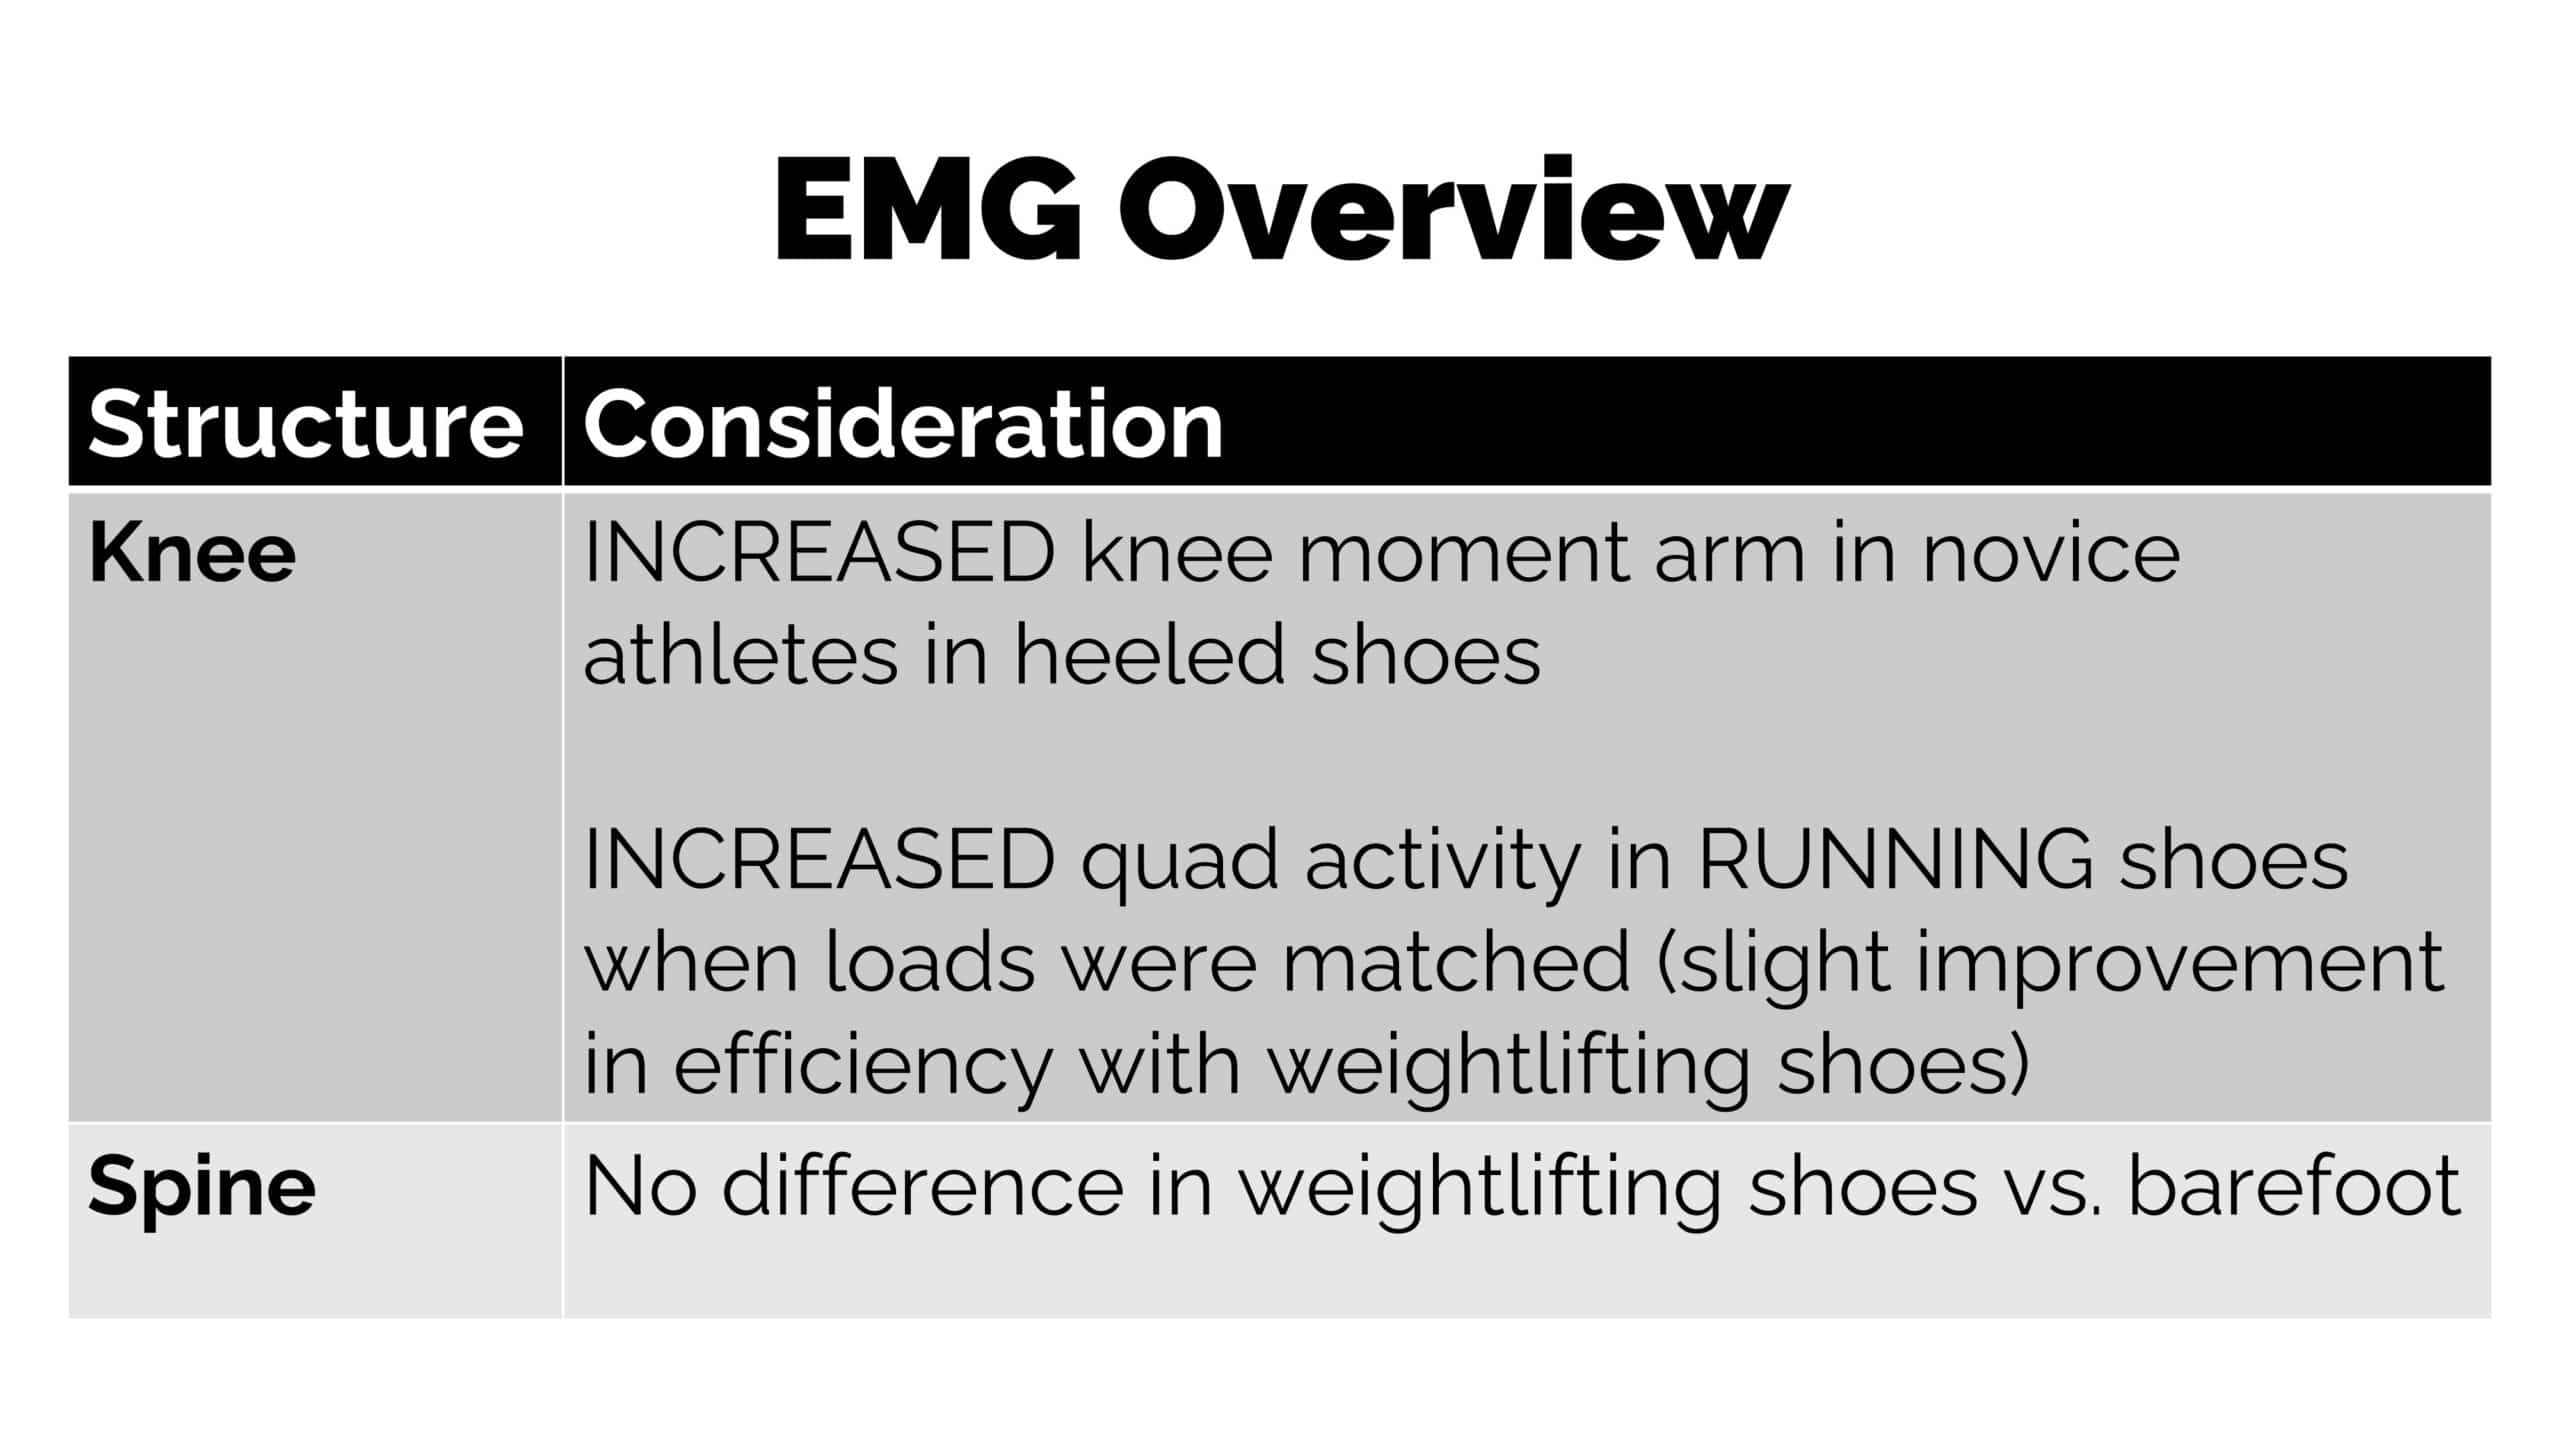 EMG weightlifting shoes